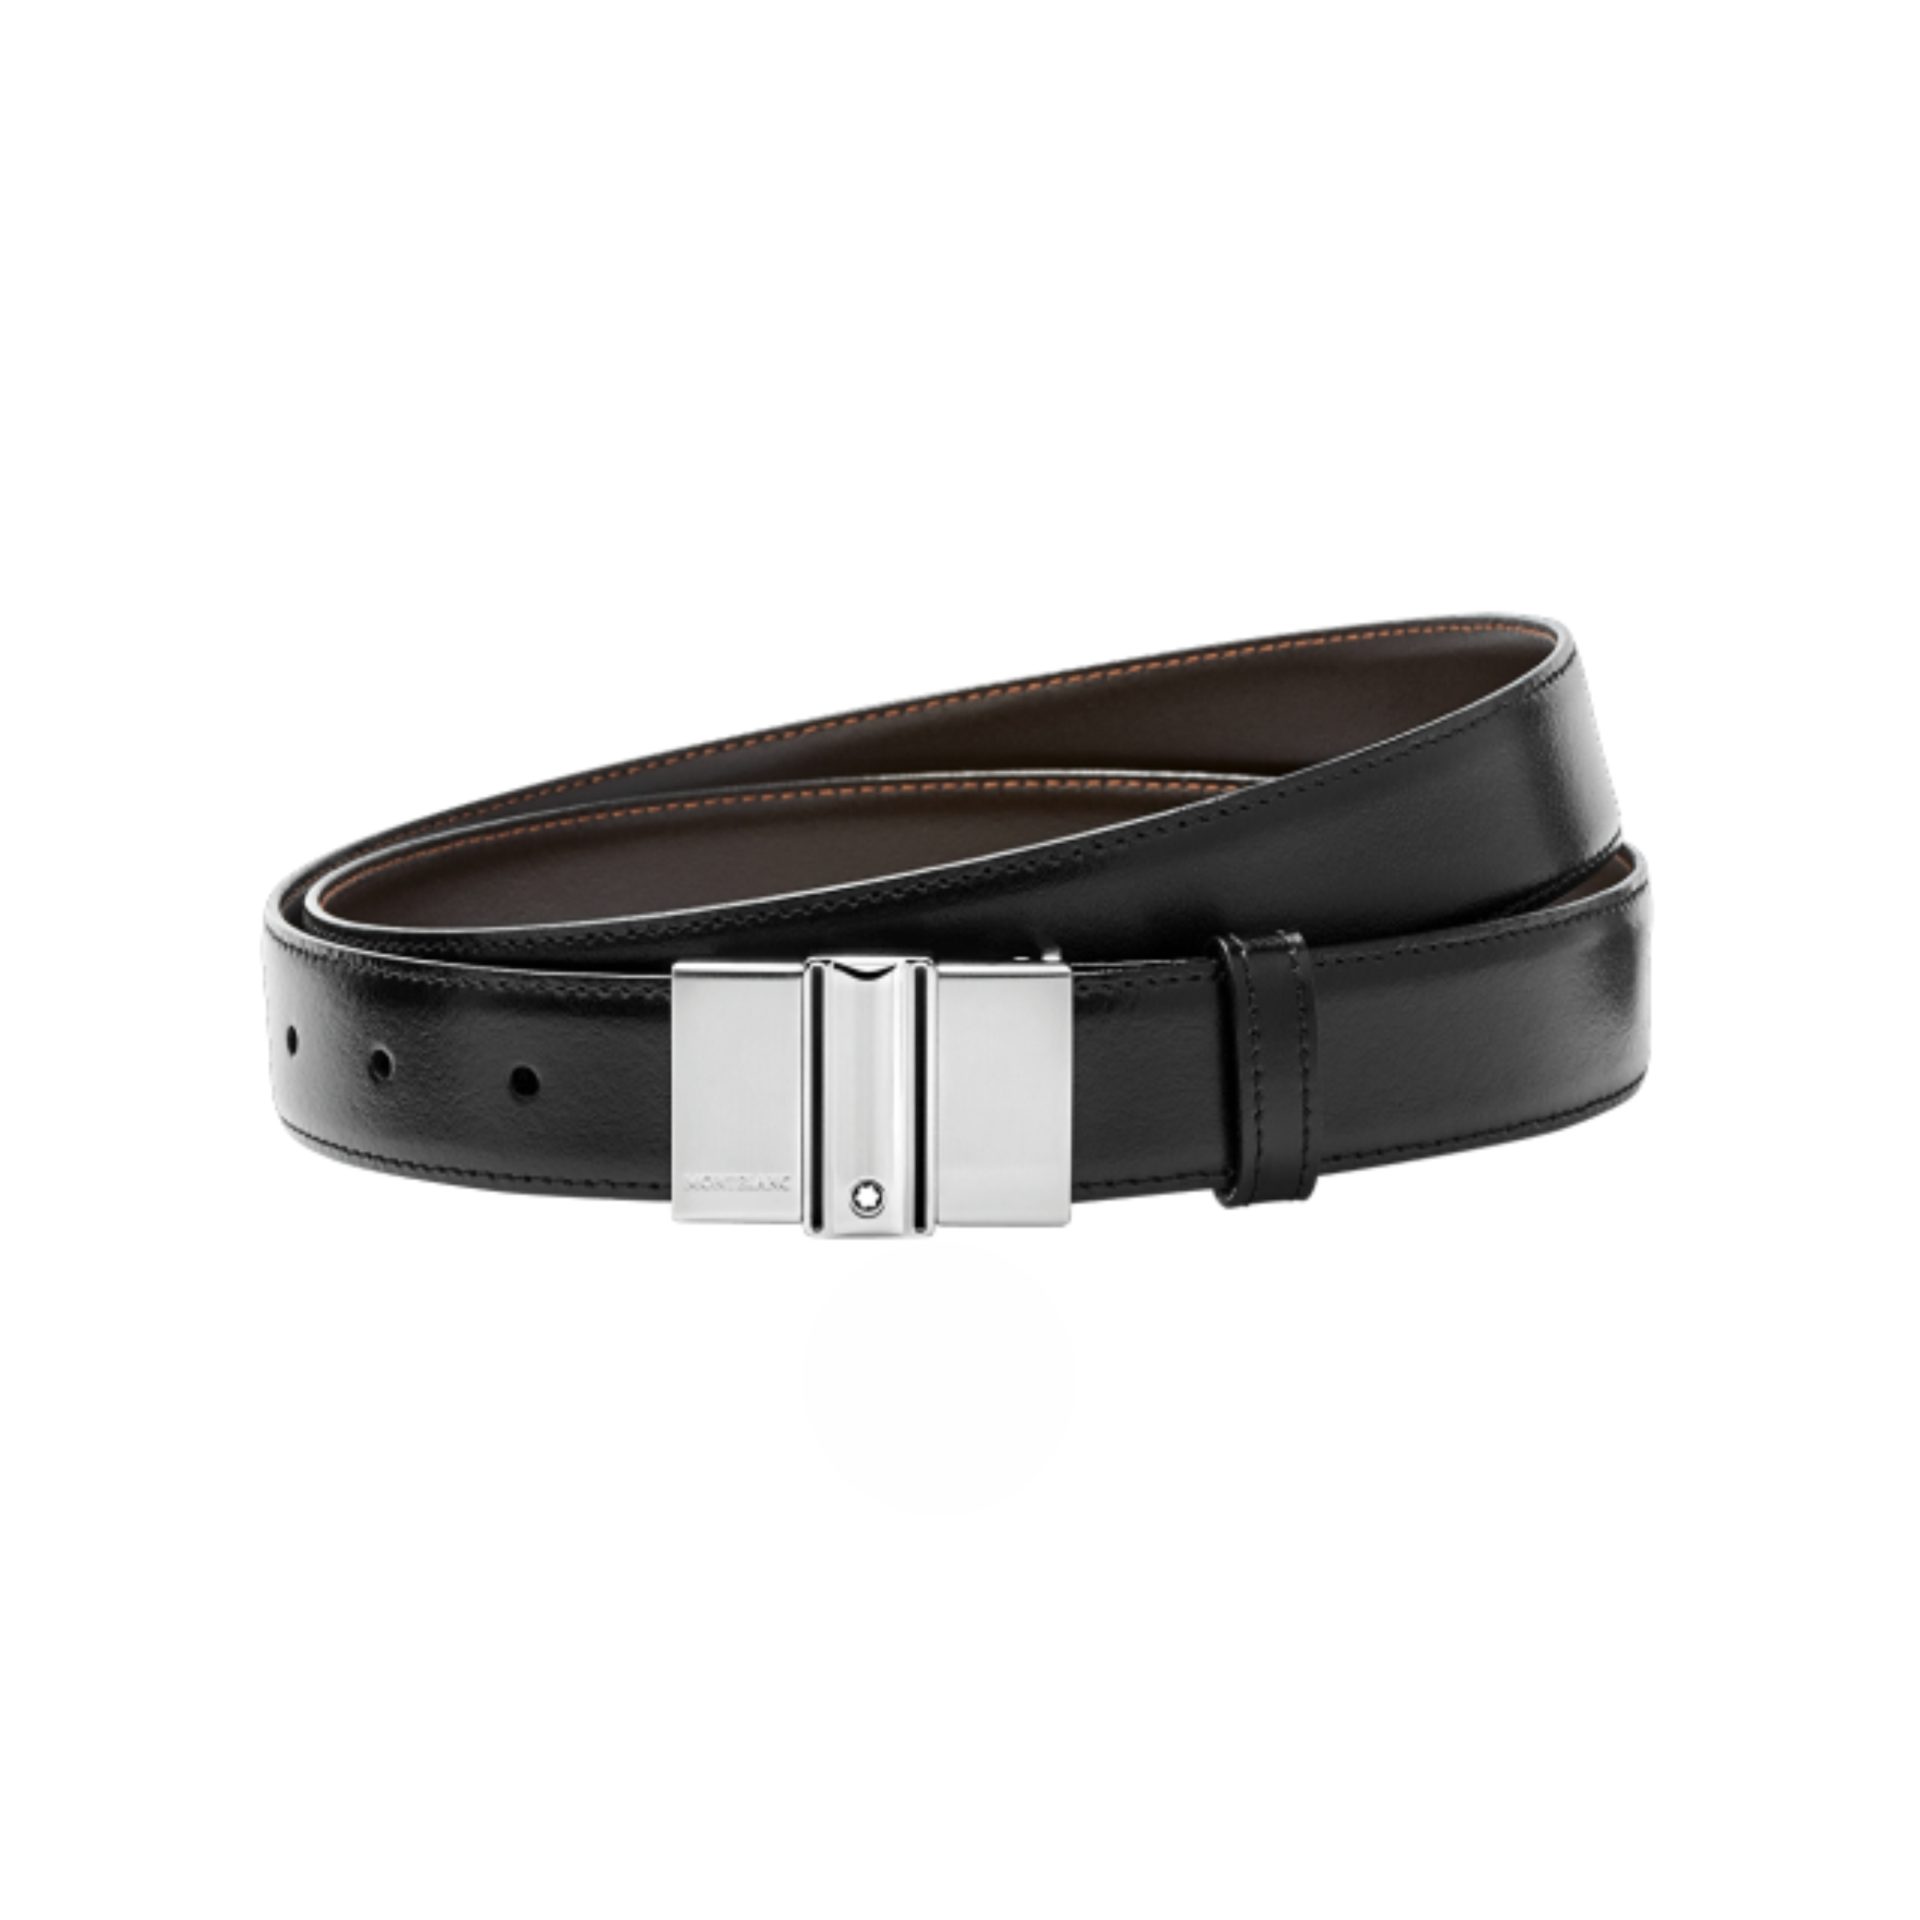 Montblanc Leather Belt With Reversable Strap - Black/Brown